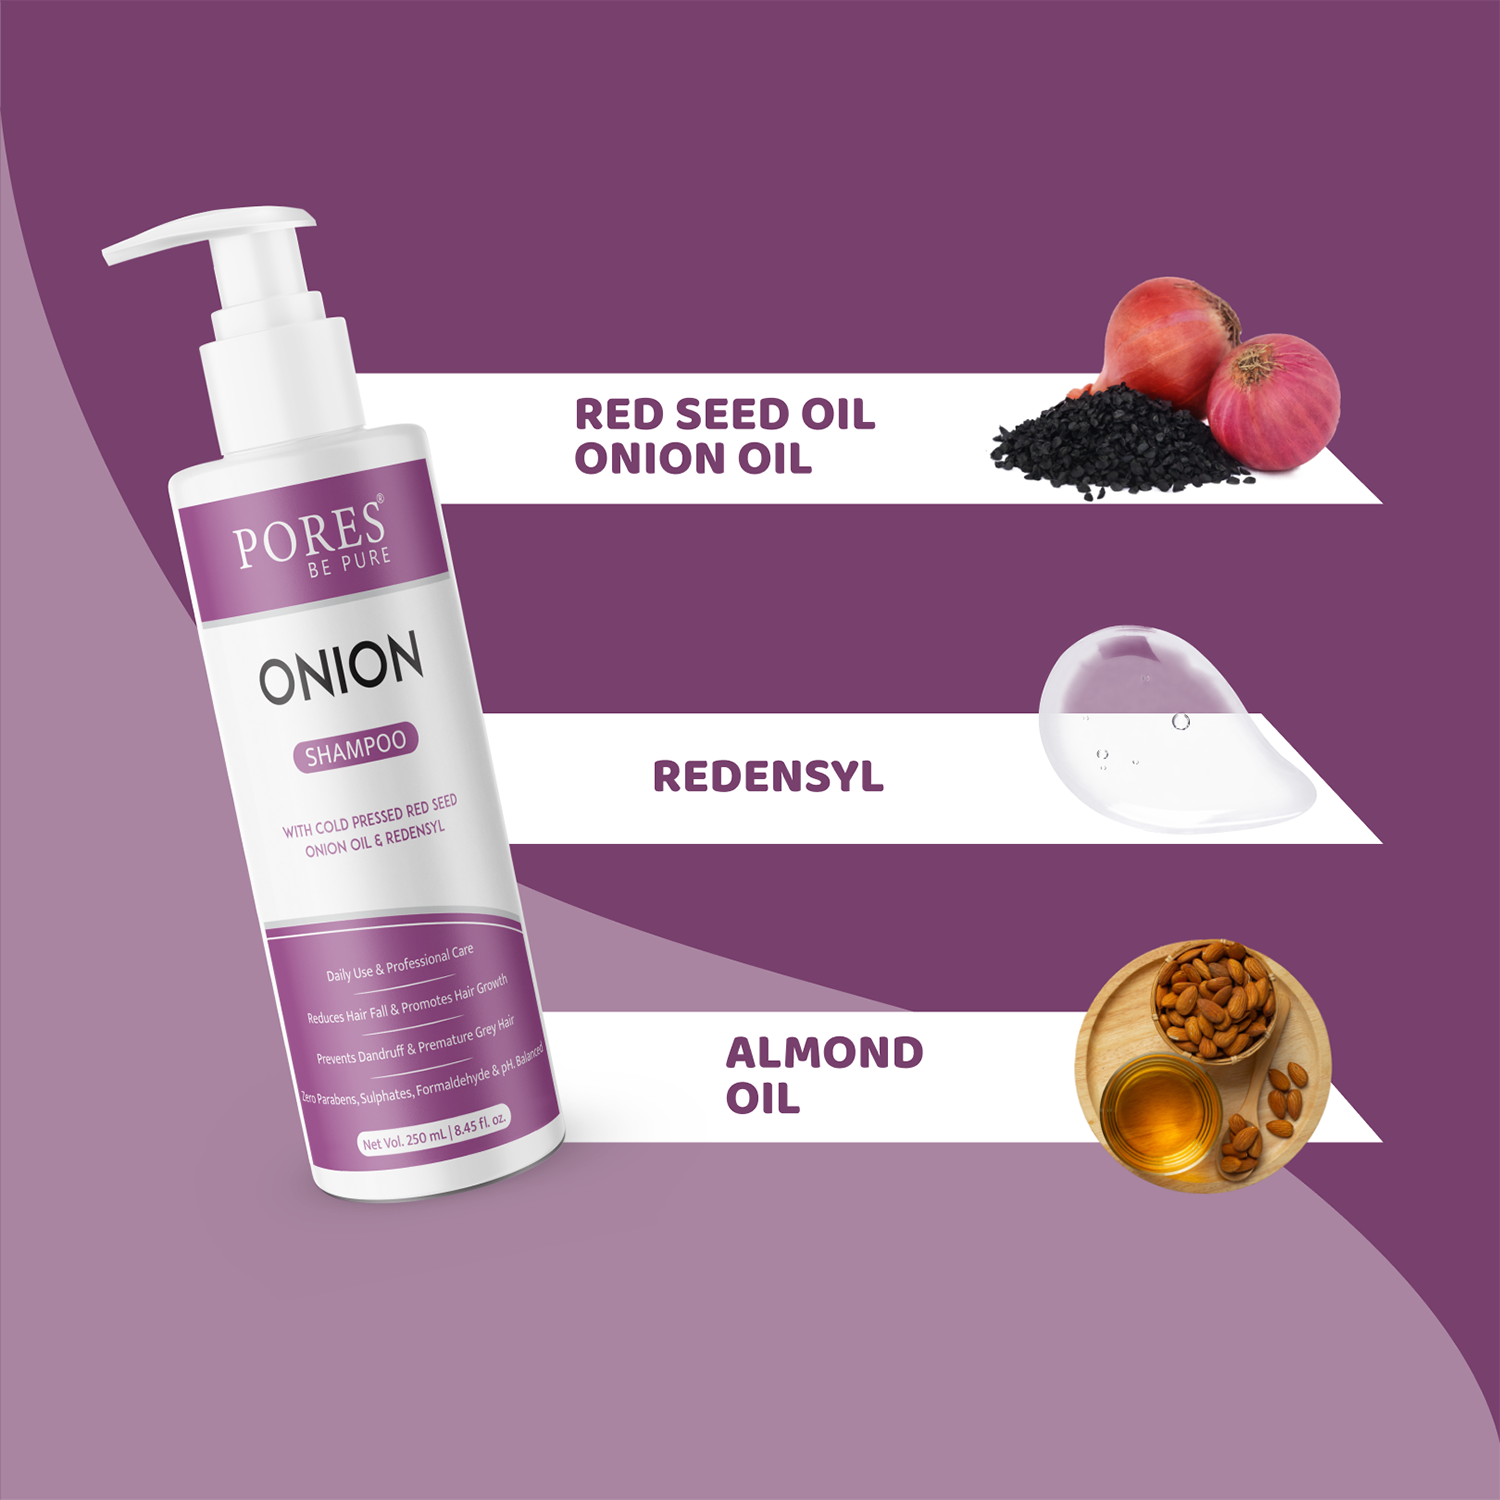 Onion Shampoo containing red seed onion oil, redensyl & almond oil